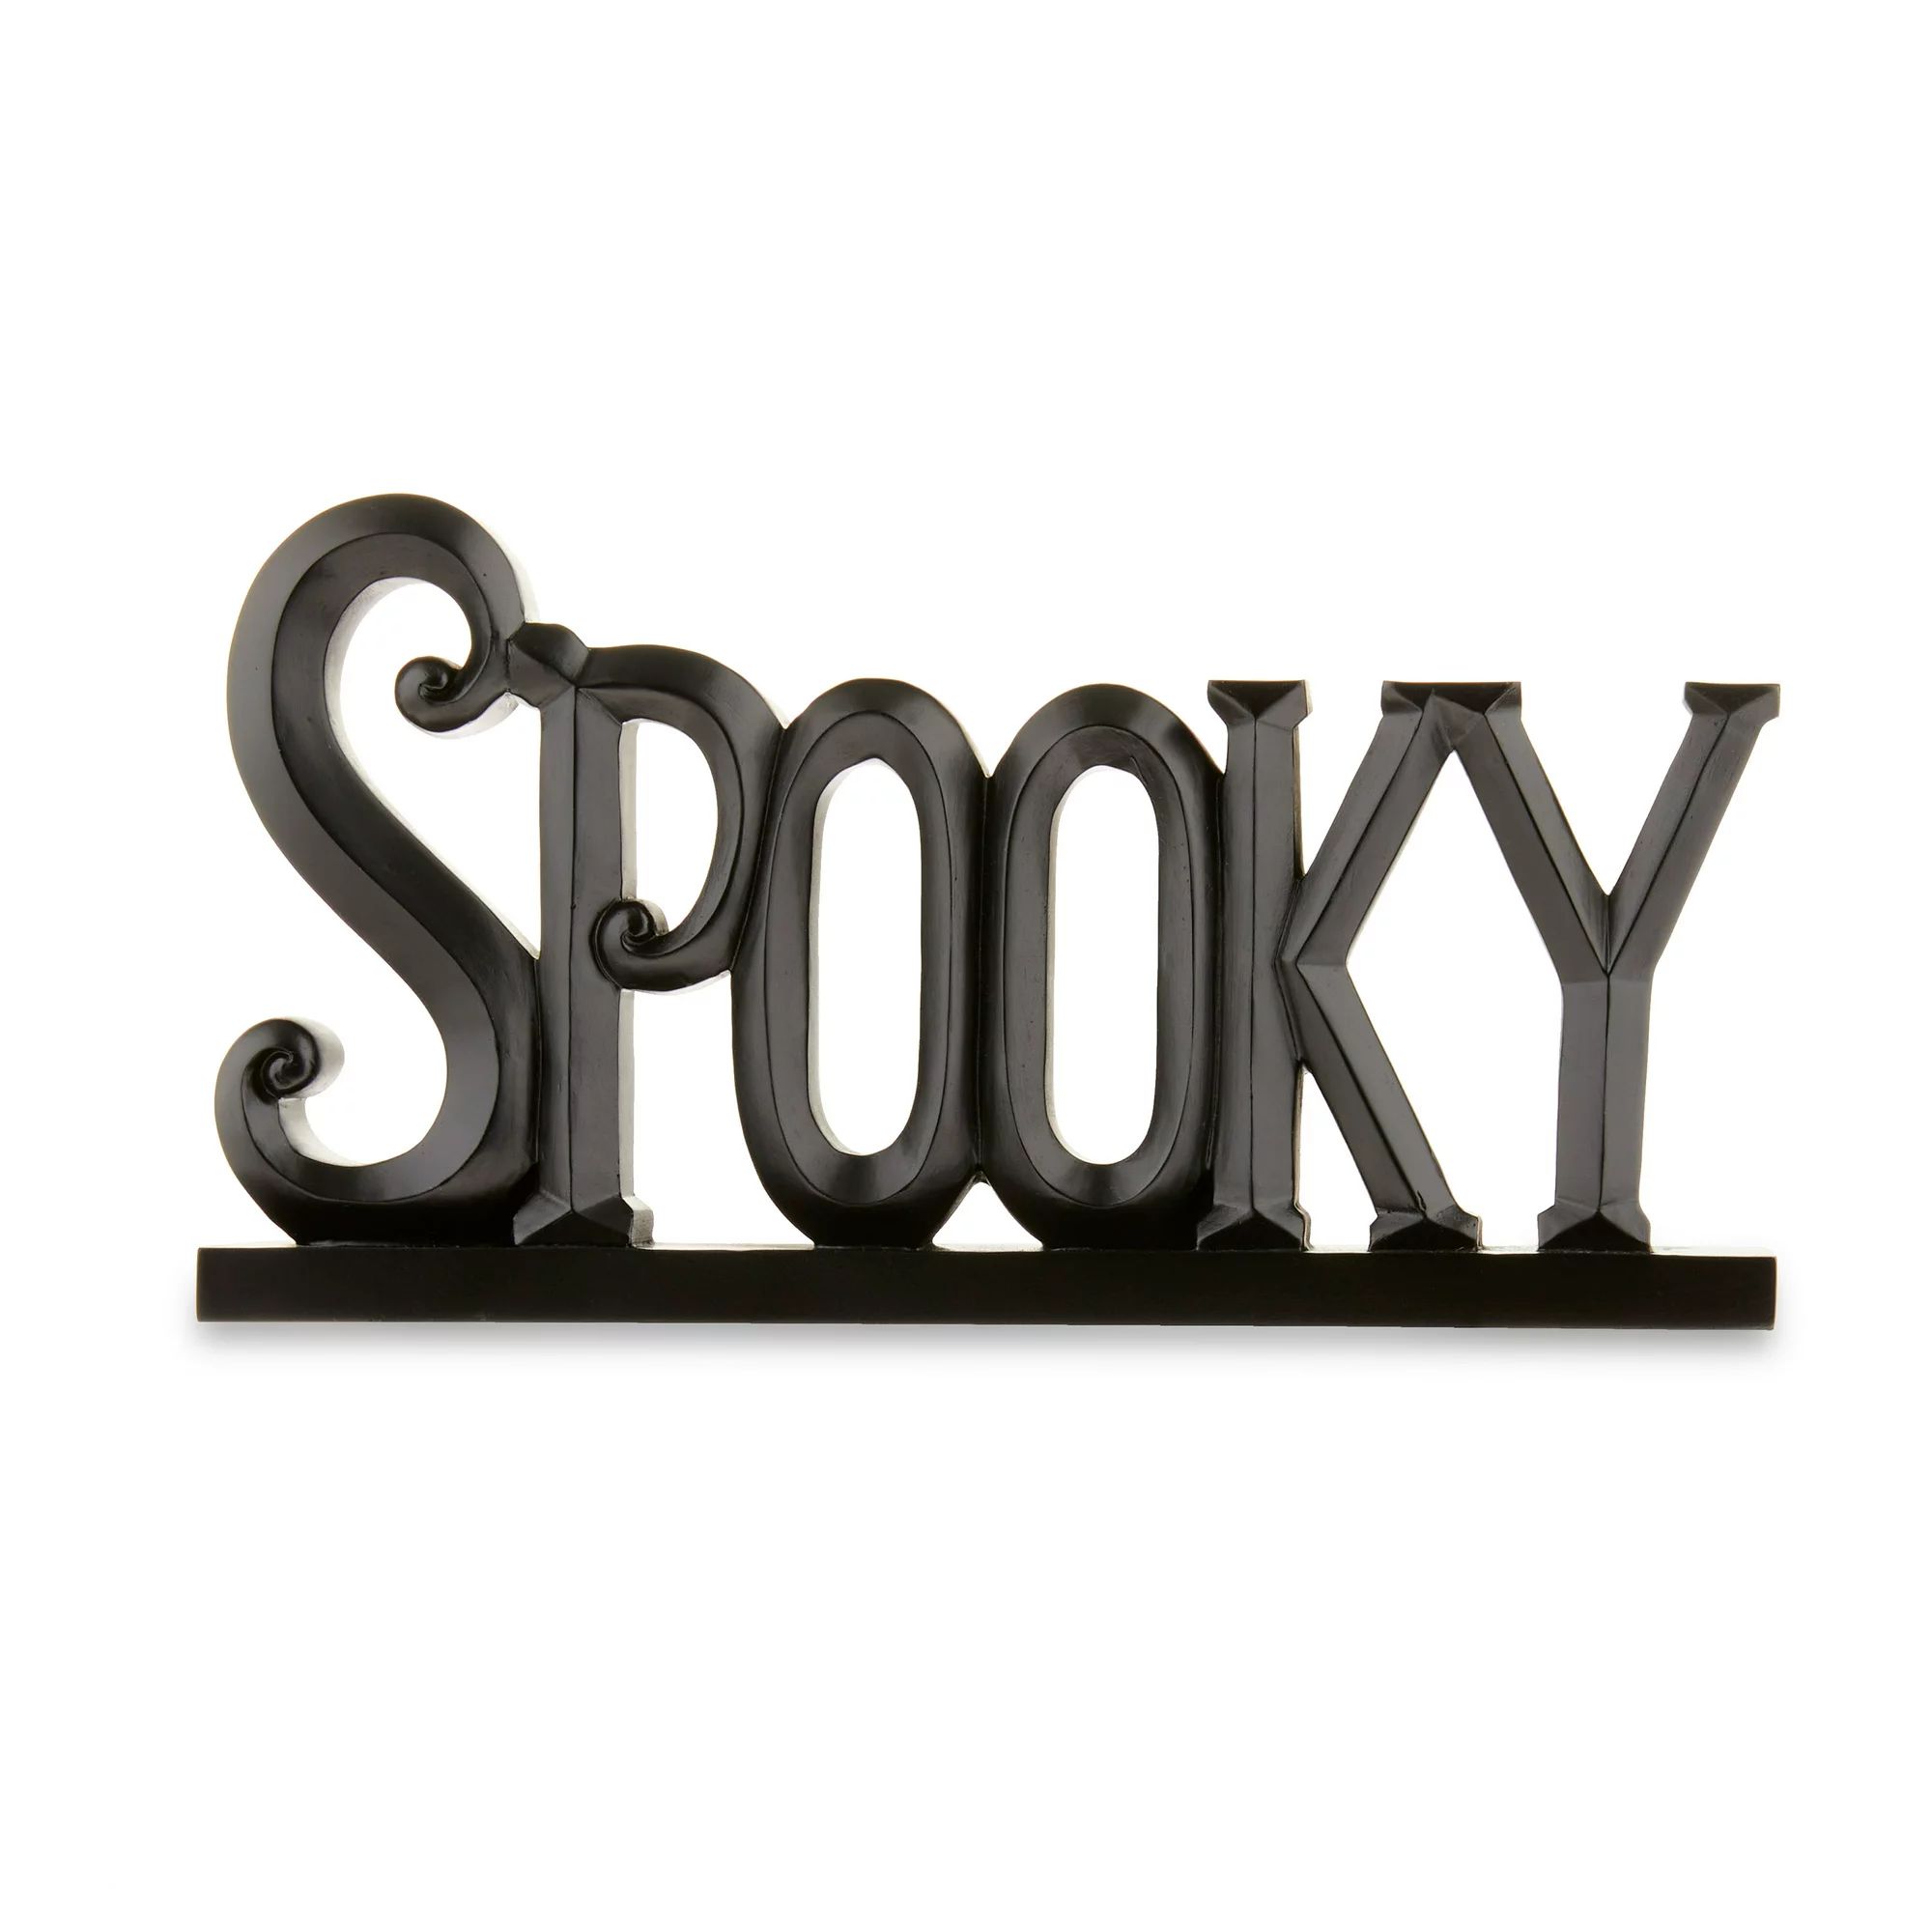 Halloween Black Resin Spooky Tabletop Message Decoration, 8.75 in x 1.38 in x 4.63 in, by Way To ... | Walmart (US)